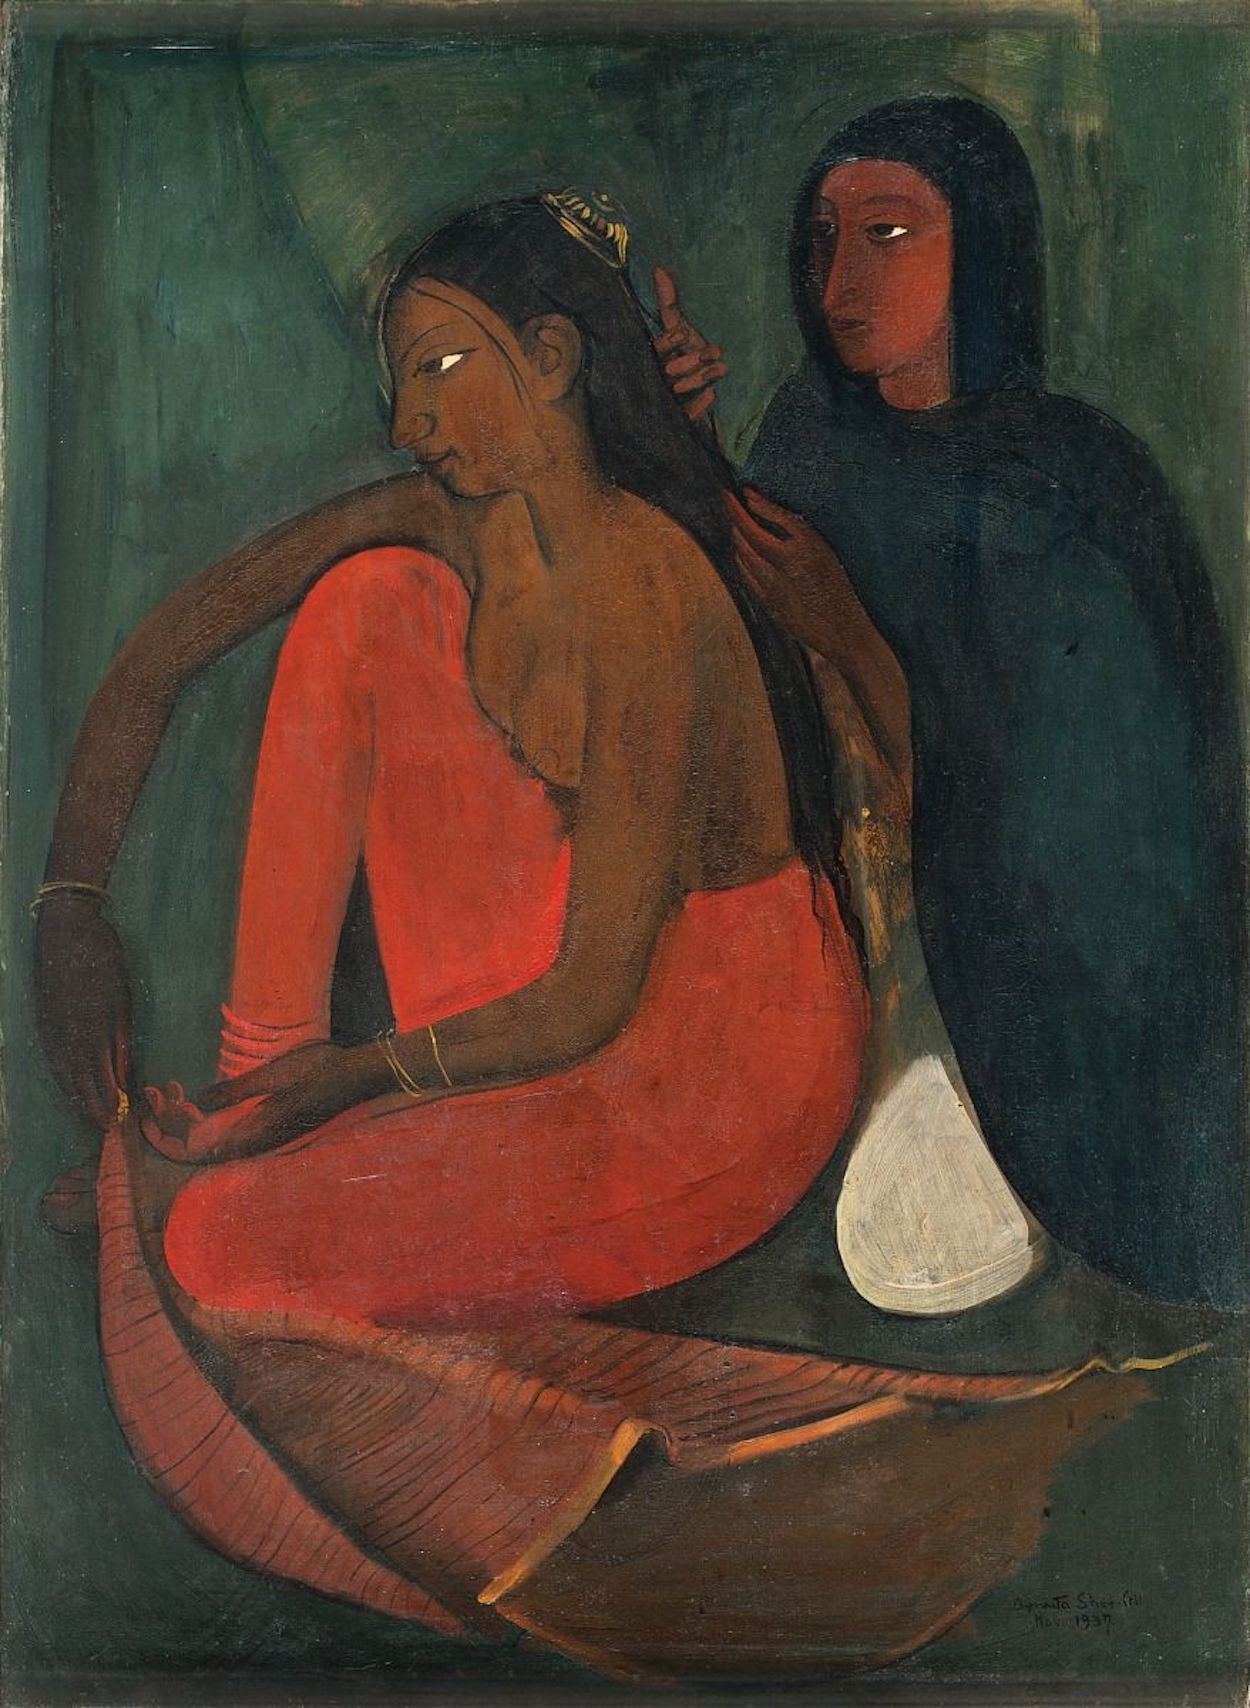 Dressing the Bride by Amrita Sher-Gil - 1937 - 95.2 x 70.4 cm private collection